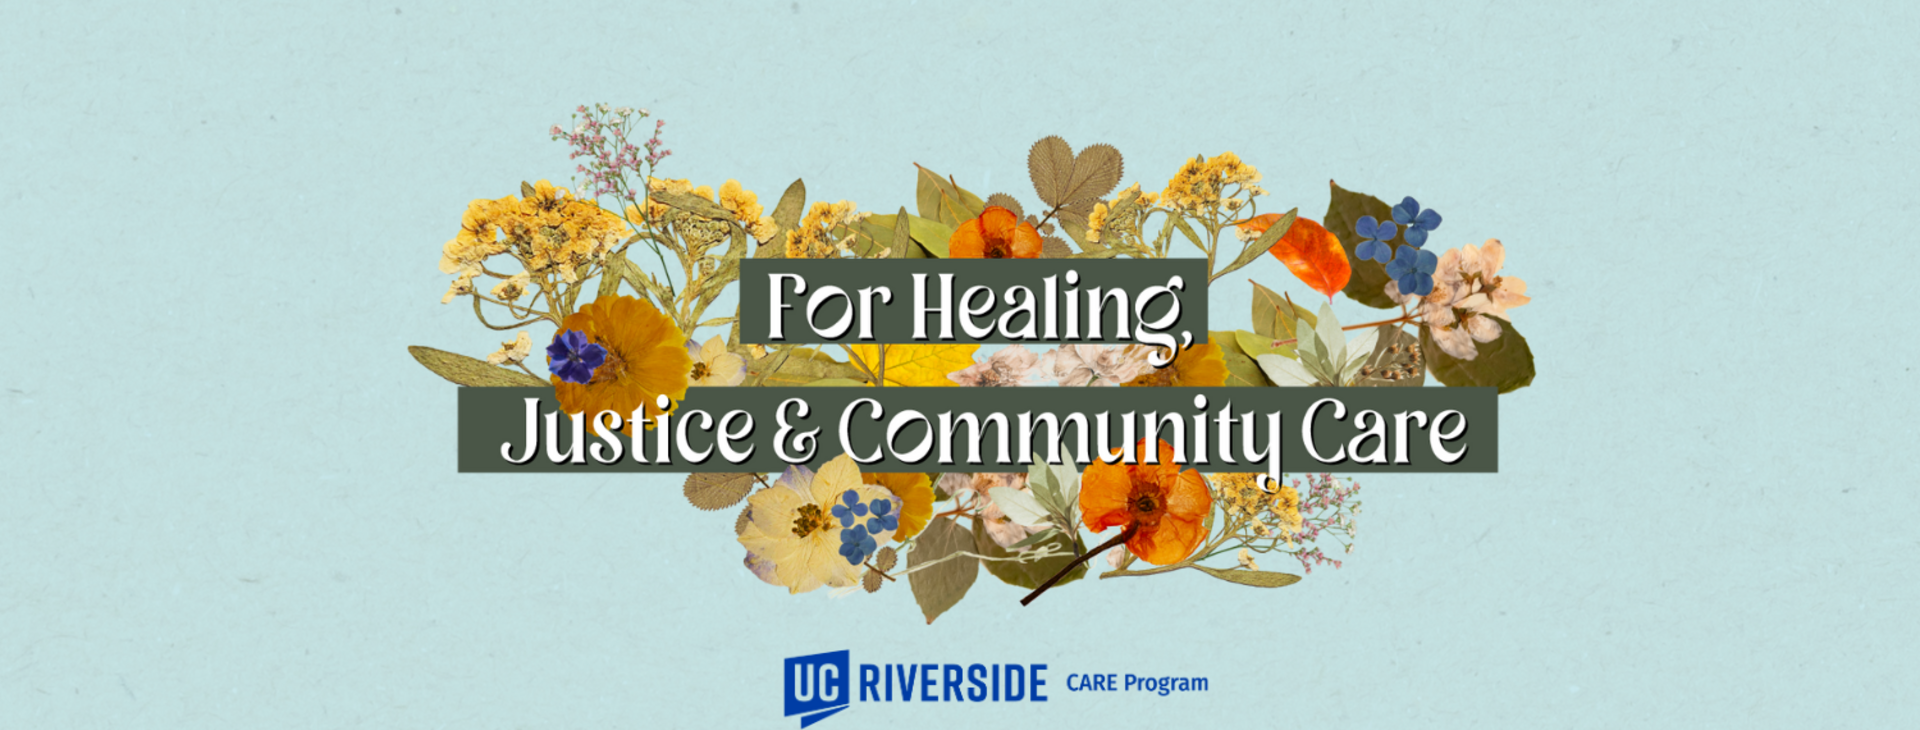 For healing, justice, and community care